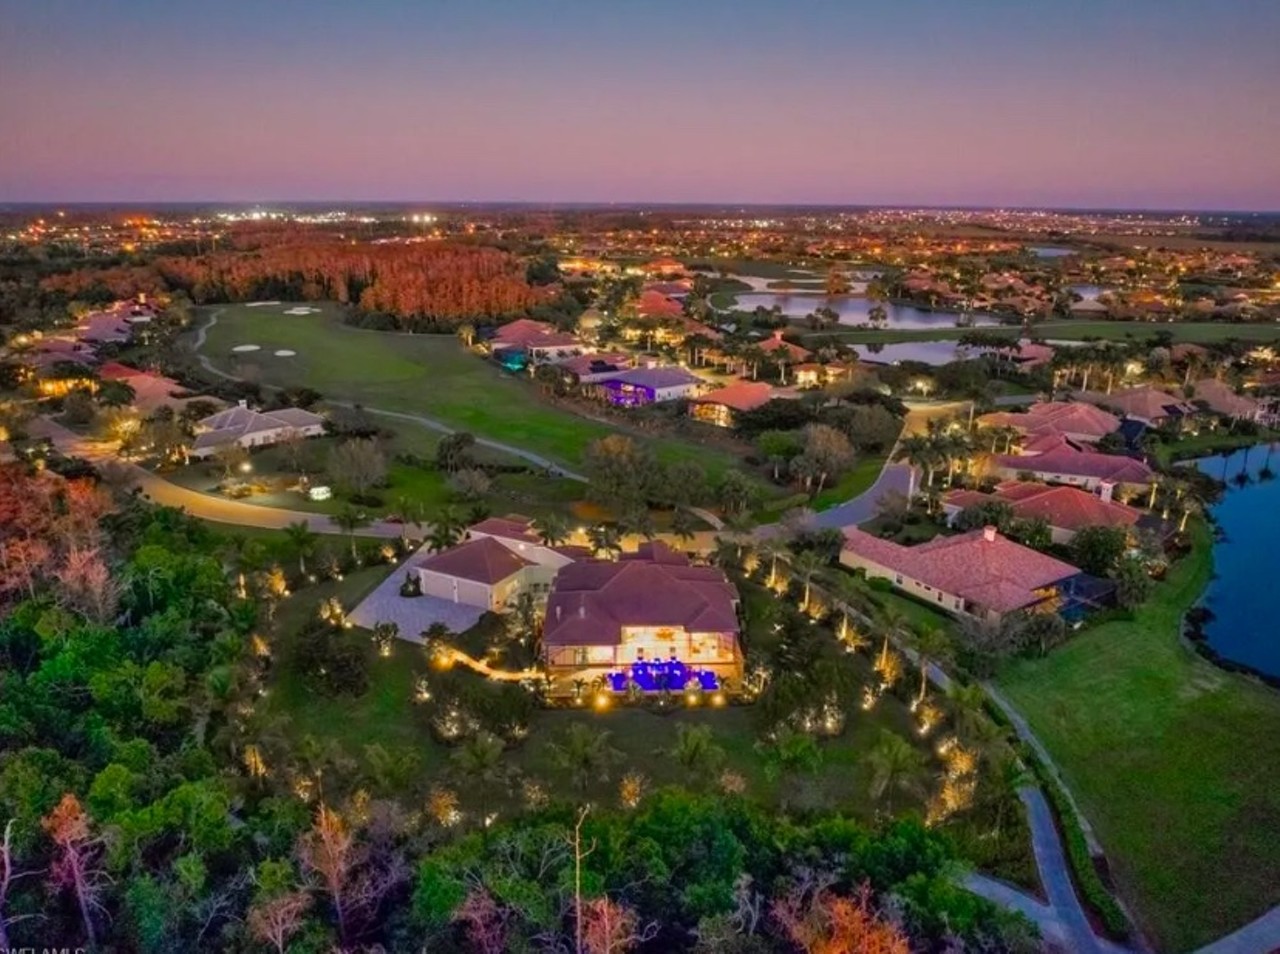 This apocalypse-ready Florida home just hit the market for $4.5 million